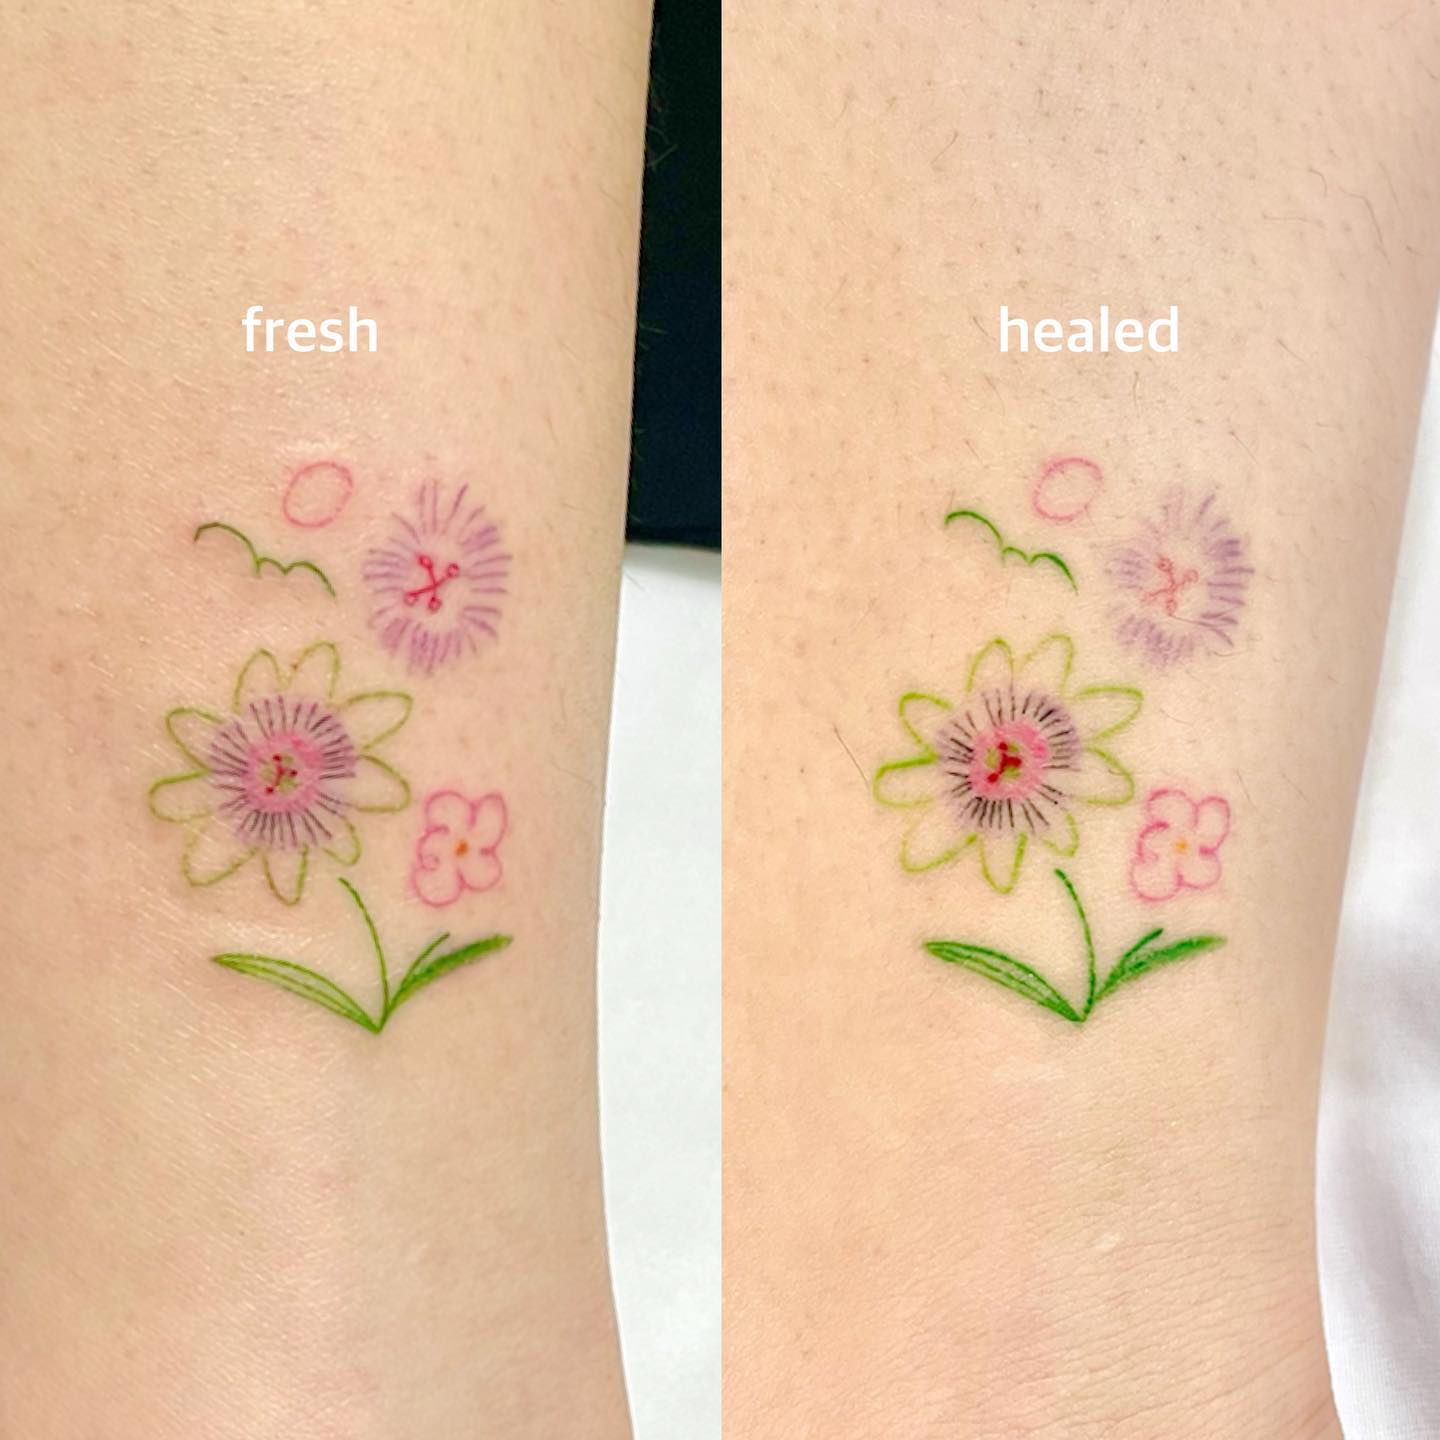 What to Do When Tattoo Is Peeling and the Ink Is Coming Off (Before and After ) - Saved Tattoo